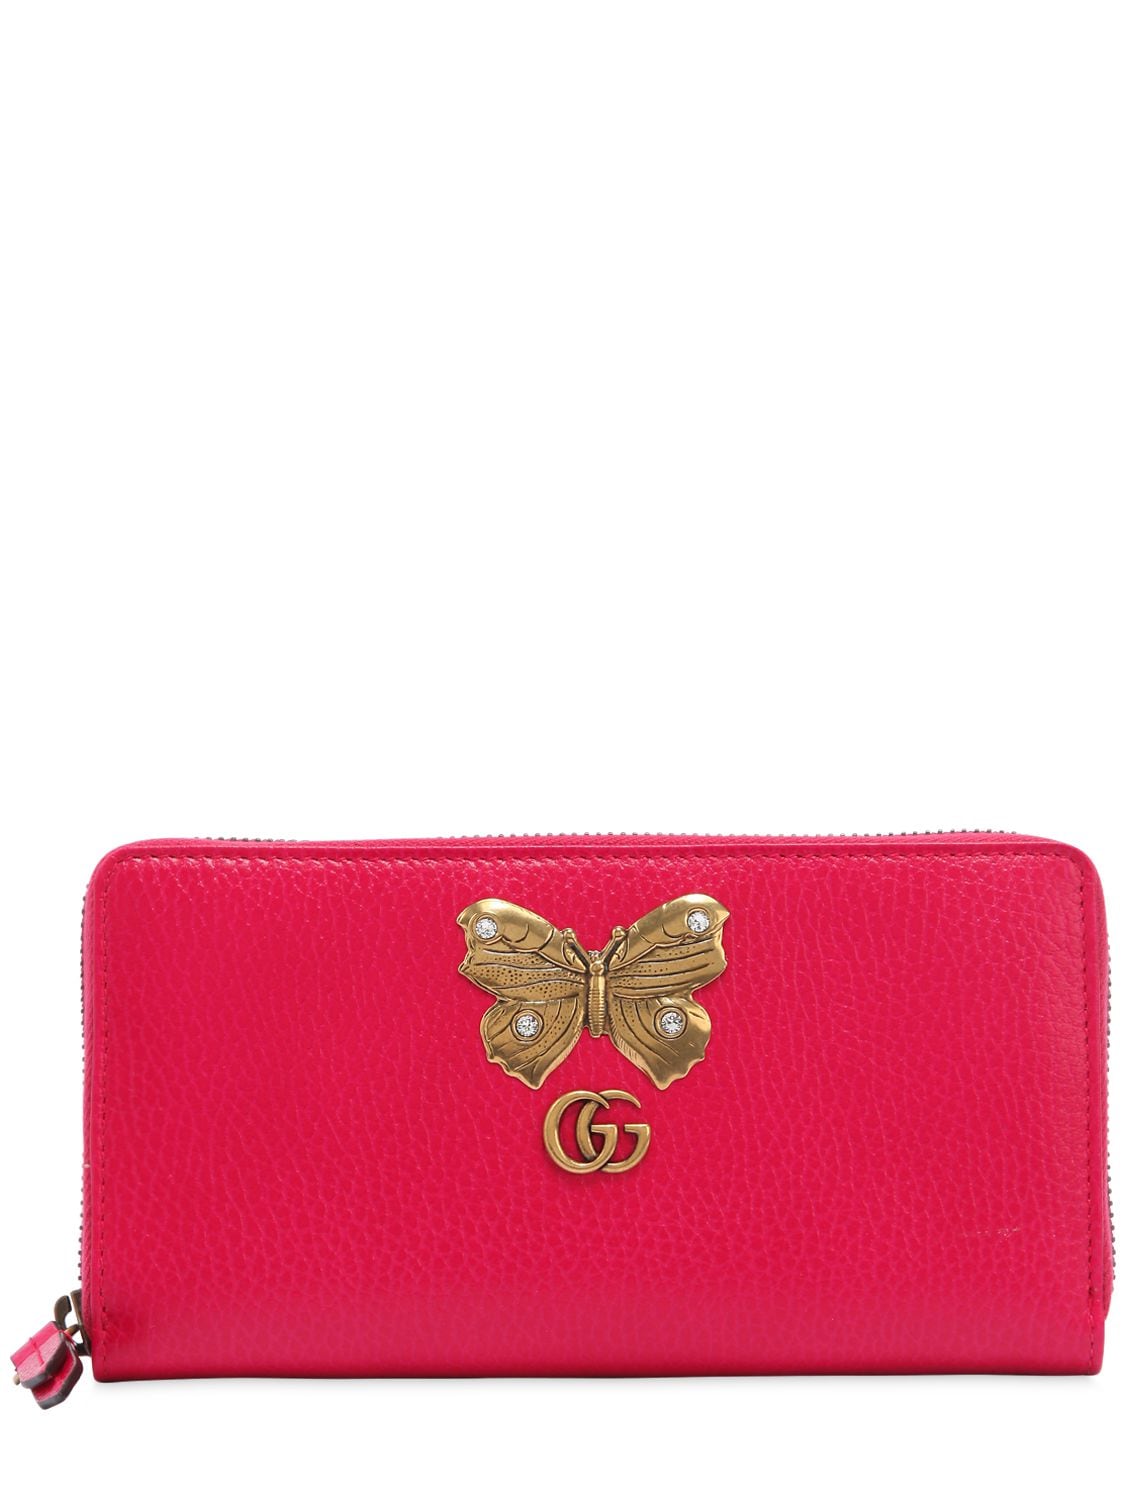 GUCCI BUTTERFLY ZIP AROUND LEATHER WALLET,67IIJS046-NTY2MQ2